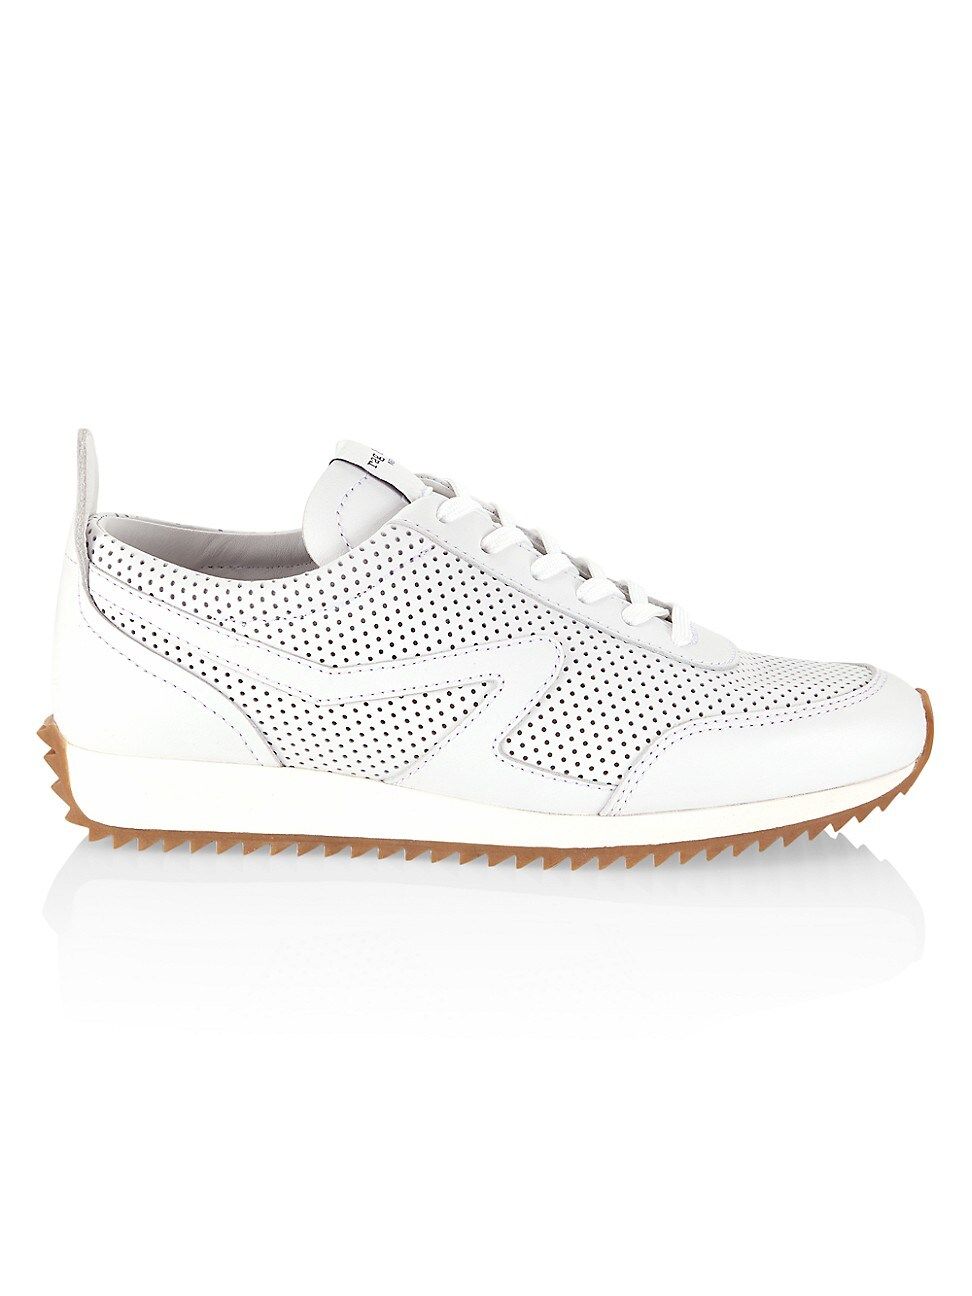 Women's Retro Leather Runner Sneakers - White - Size 6 | Saks Fifth Avenue